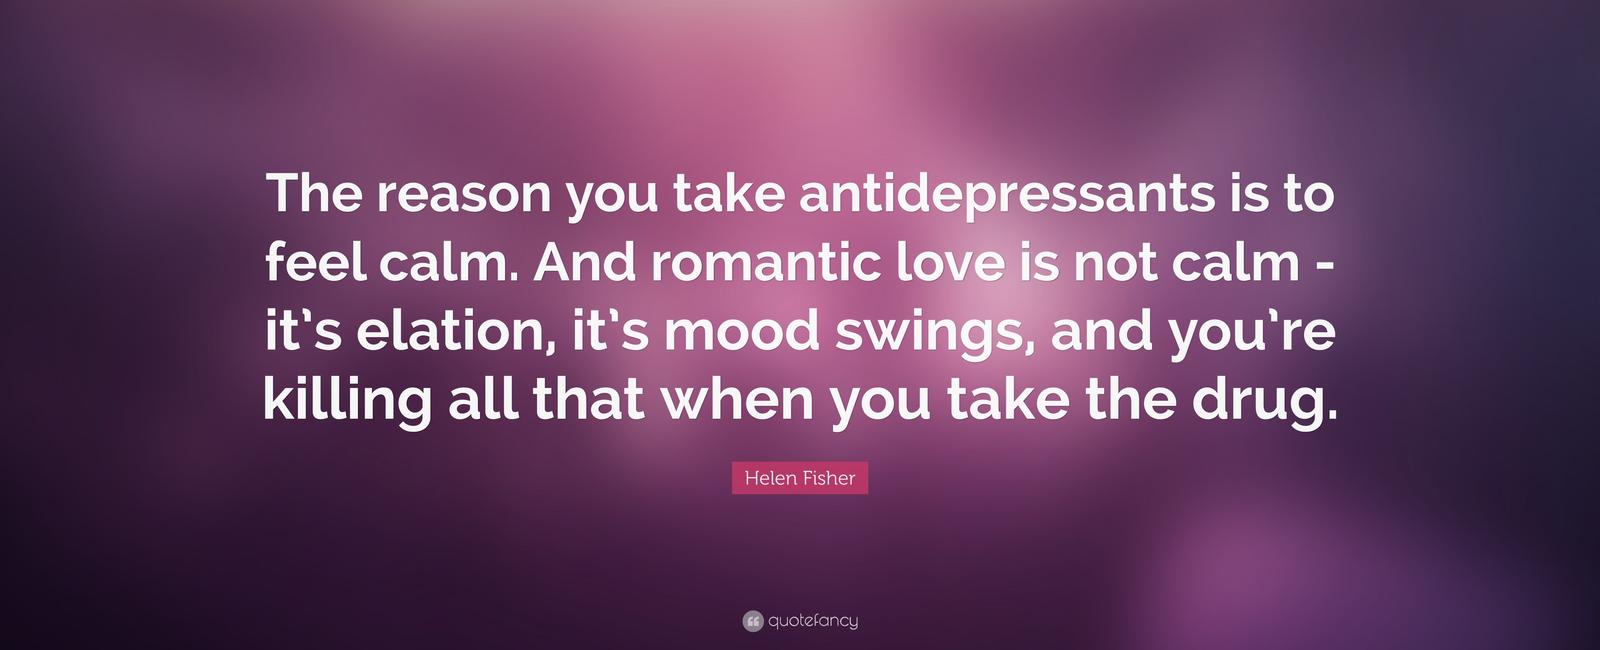 Antidepressants may compromise romantic love because they enhance serotonin levels higher serotonin levels blunt emotions and inhibit obsessive thoughts about the lover both crucial components of love